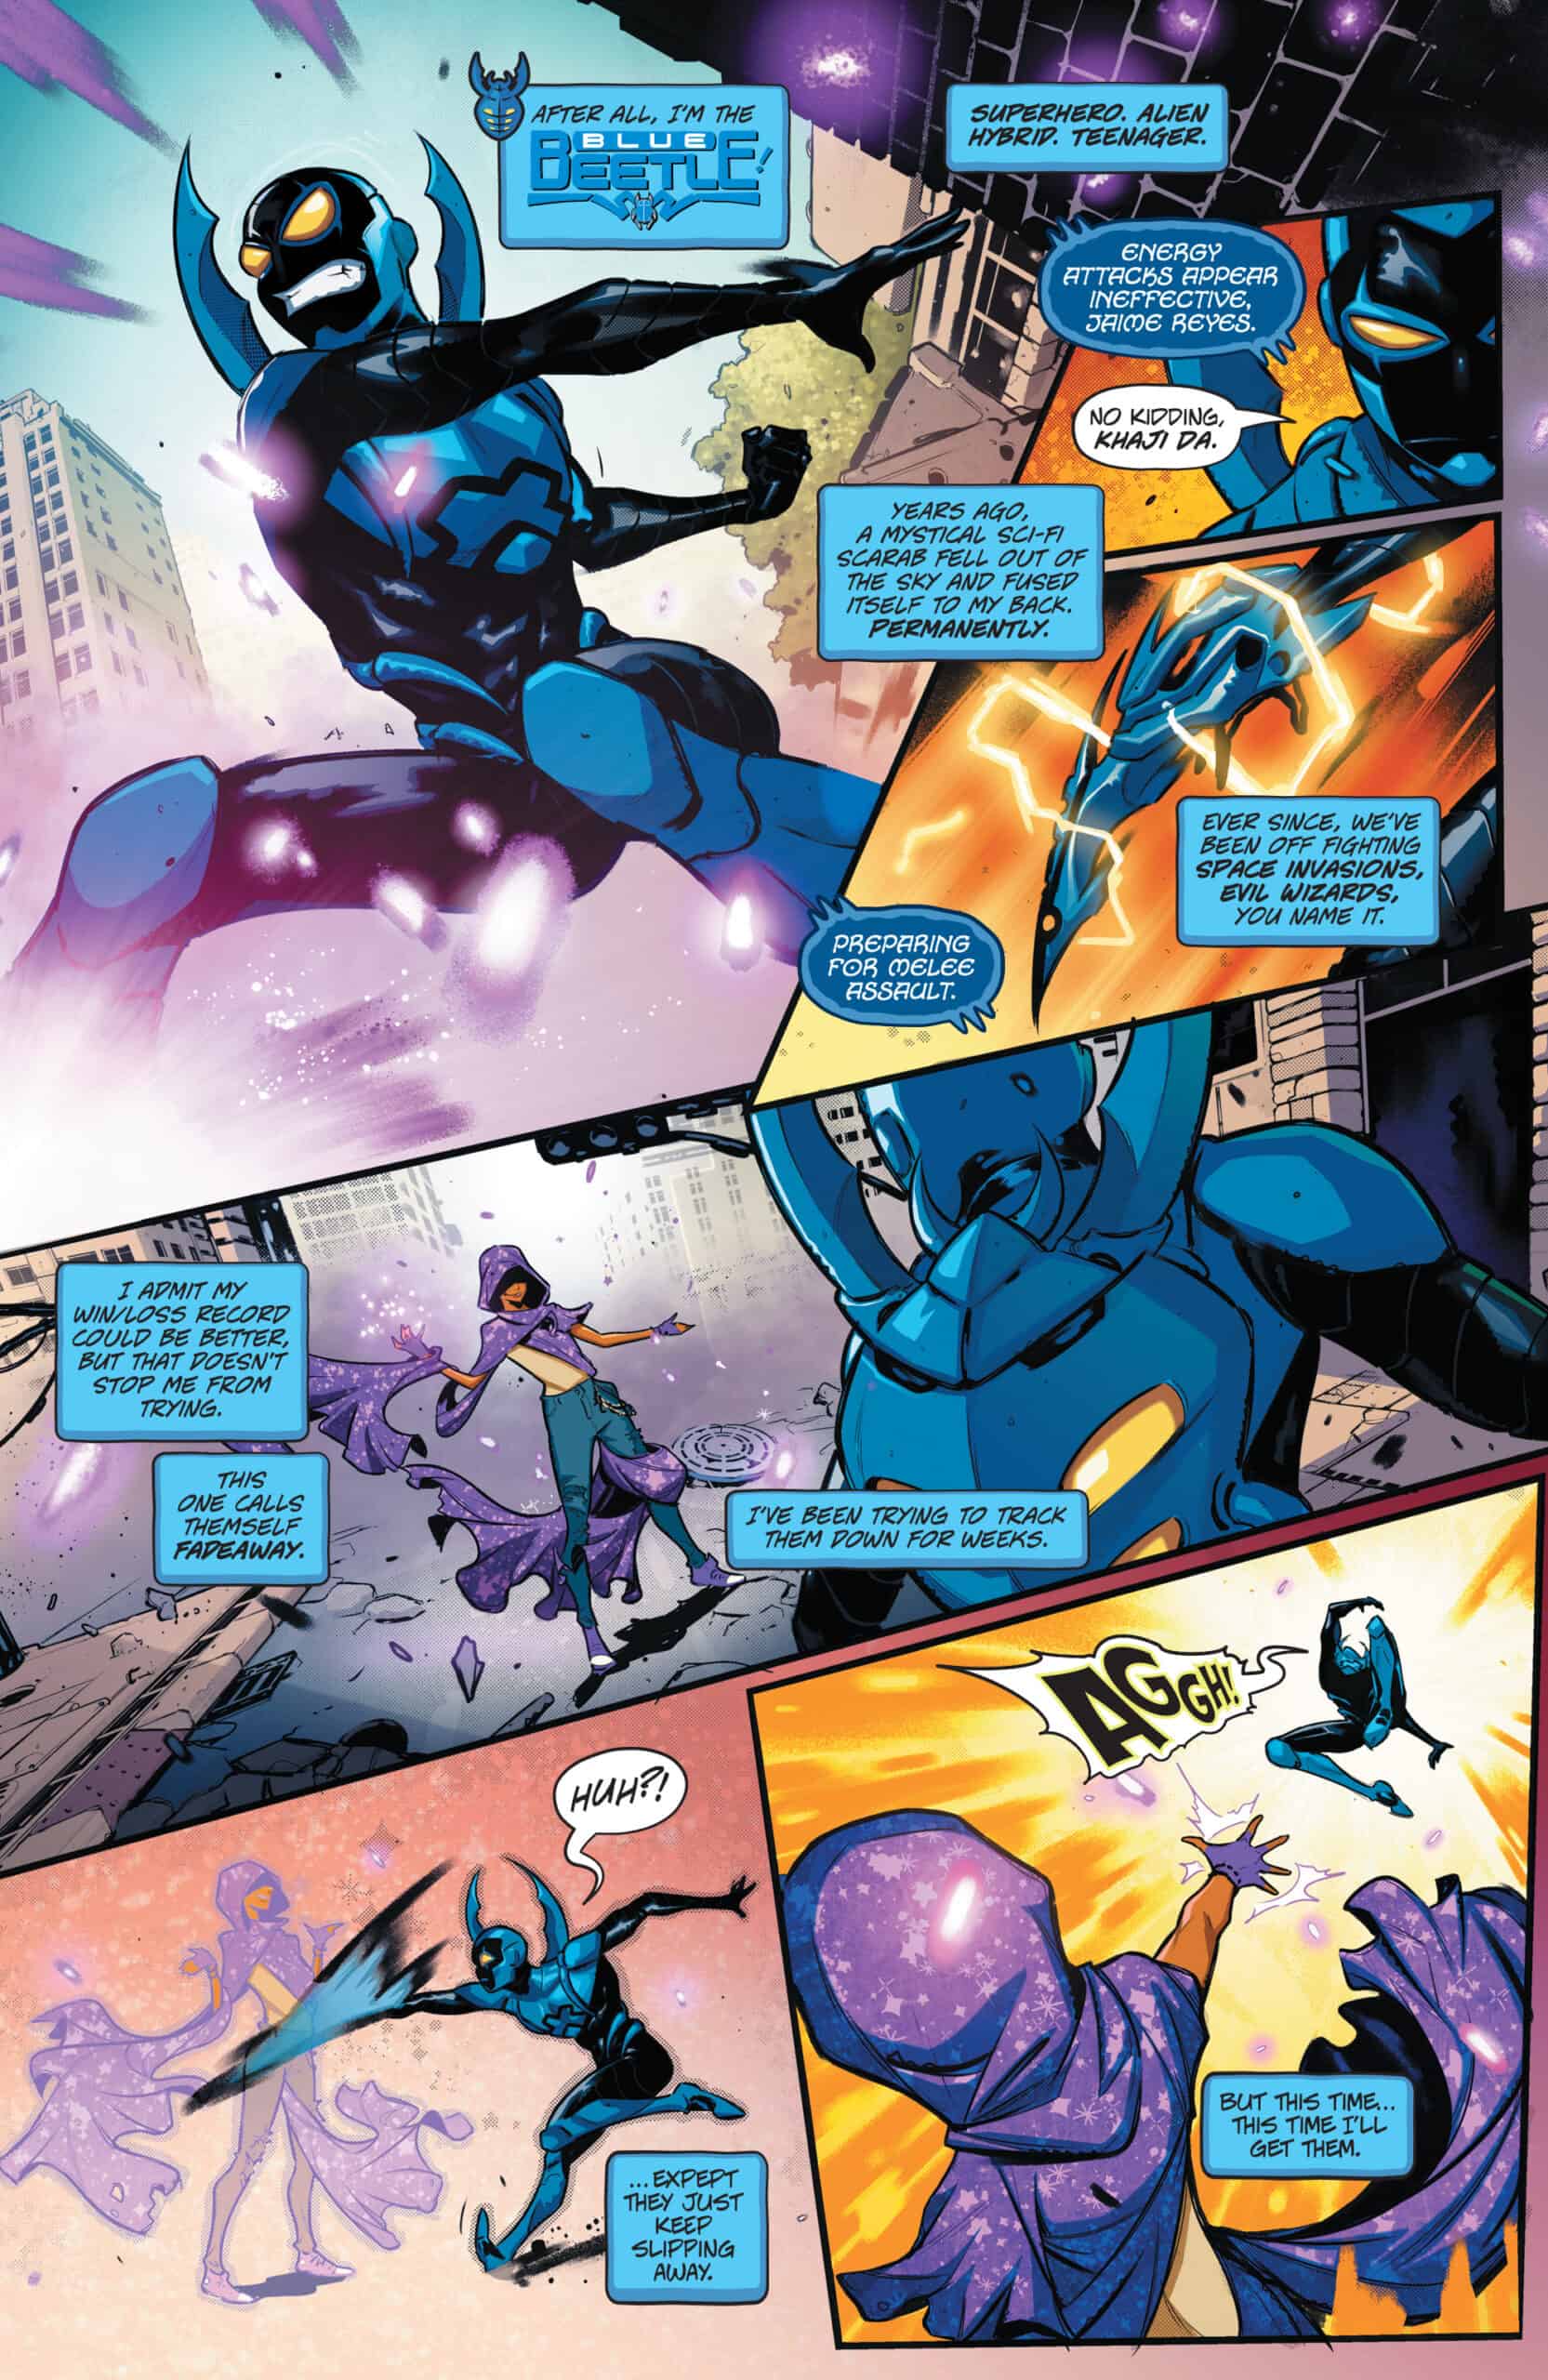 DC COMICS SNEAK PEEK for Nov. 29, 2022: Are Jaime Reyes' Days As Blue Beetle  Over? Find Out in BLUE BEETLE: GRADUATION DAY #1 of 6 - Comic Watch